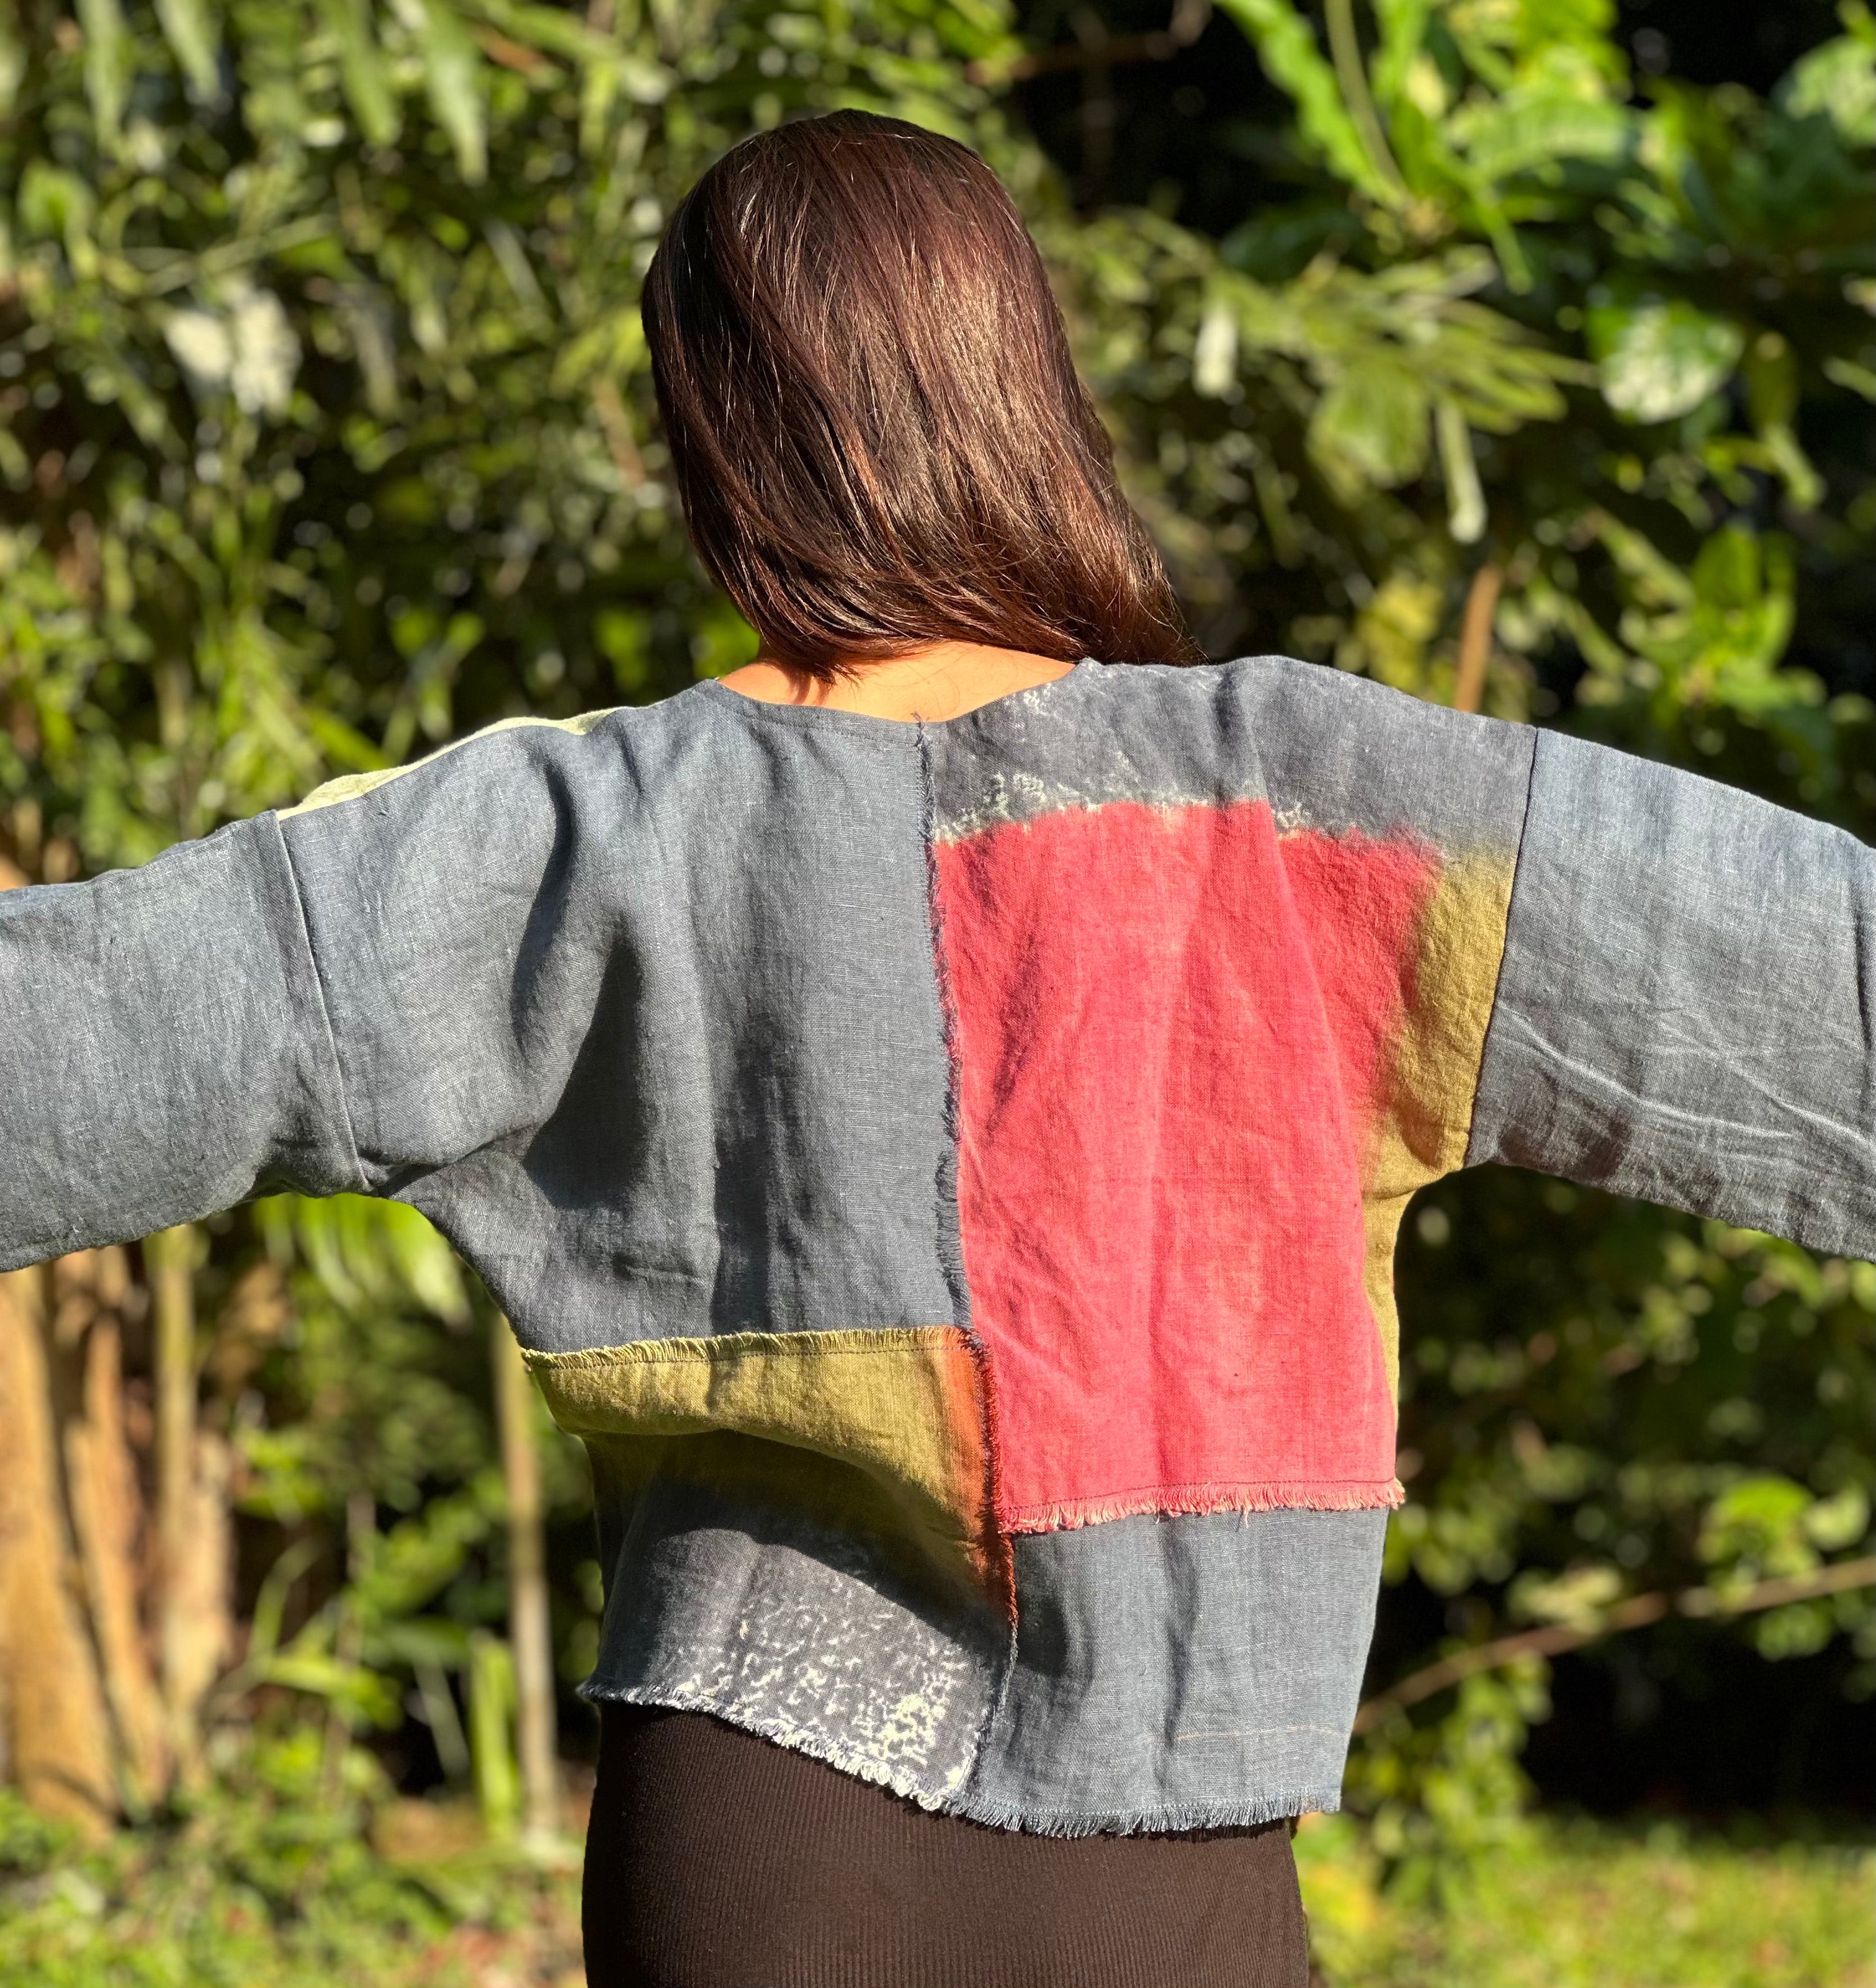 Abstract Patch Jacket